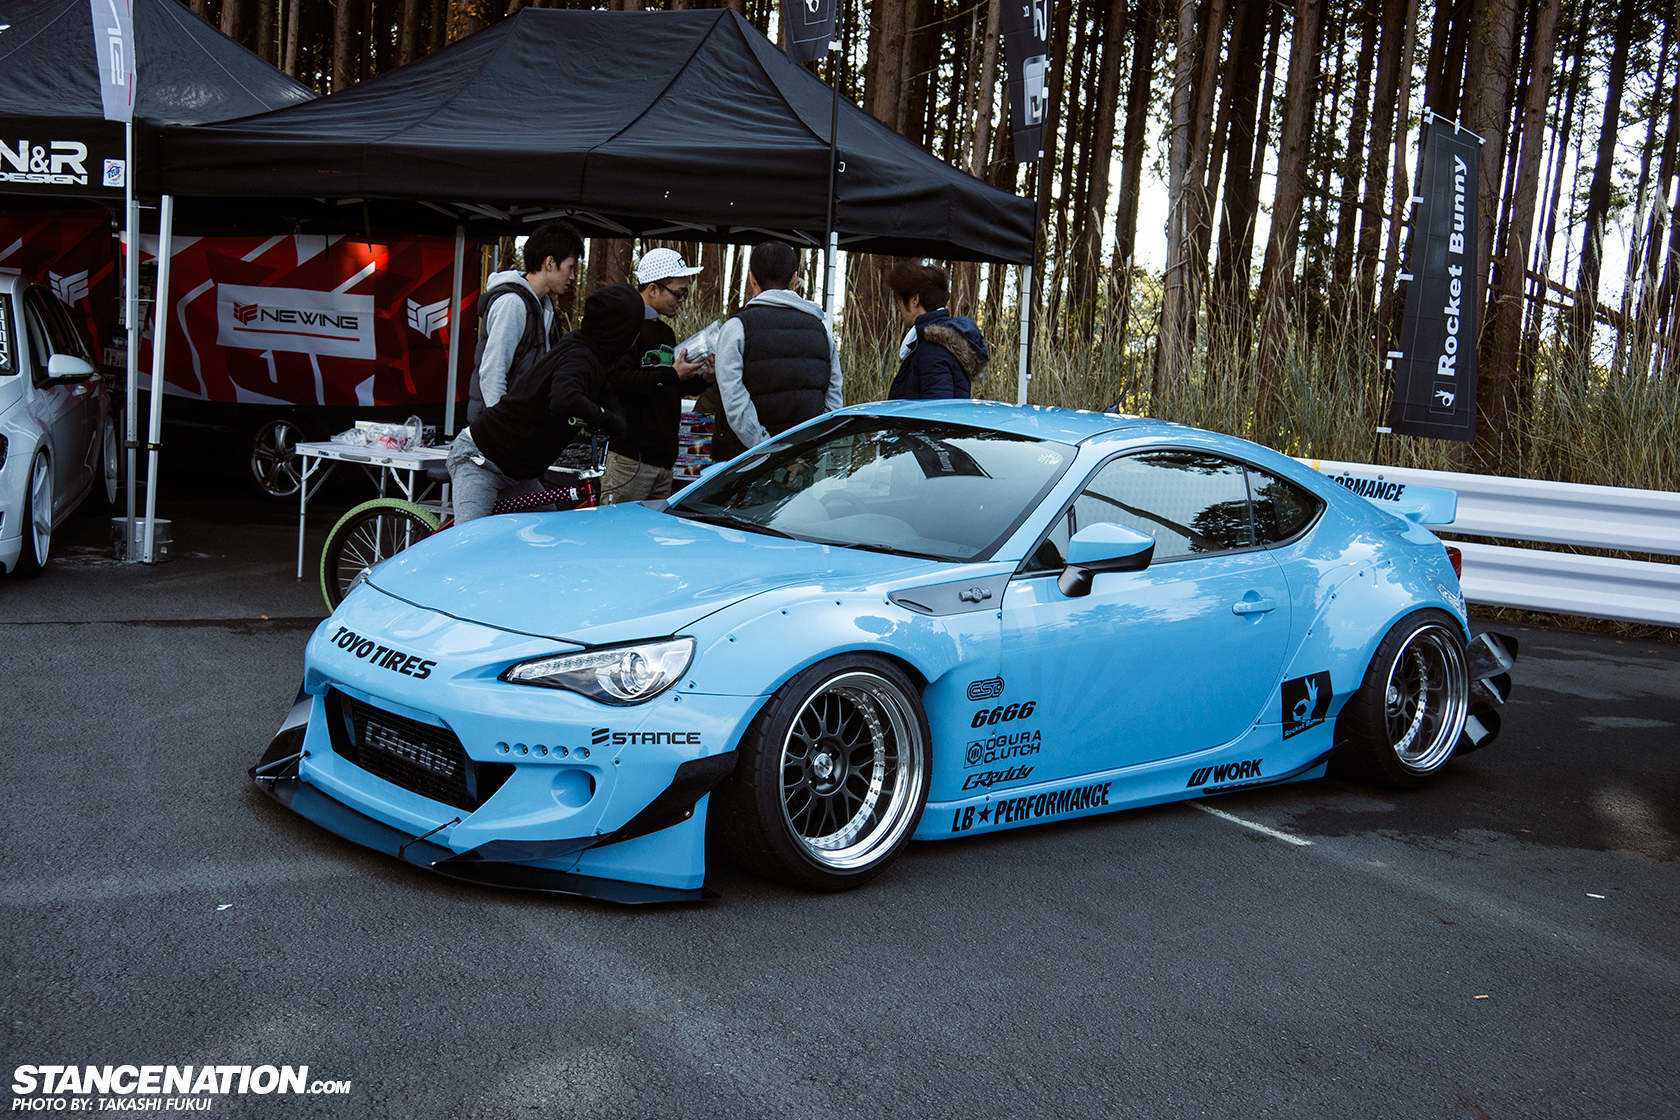 stanced-baby-blue-toyota-gt-86-is-a-head-turner-photo-gallery_2.jpg